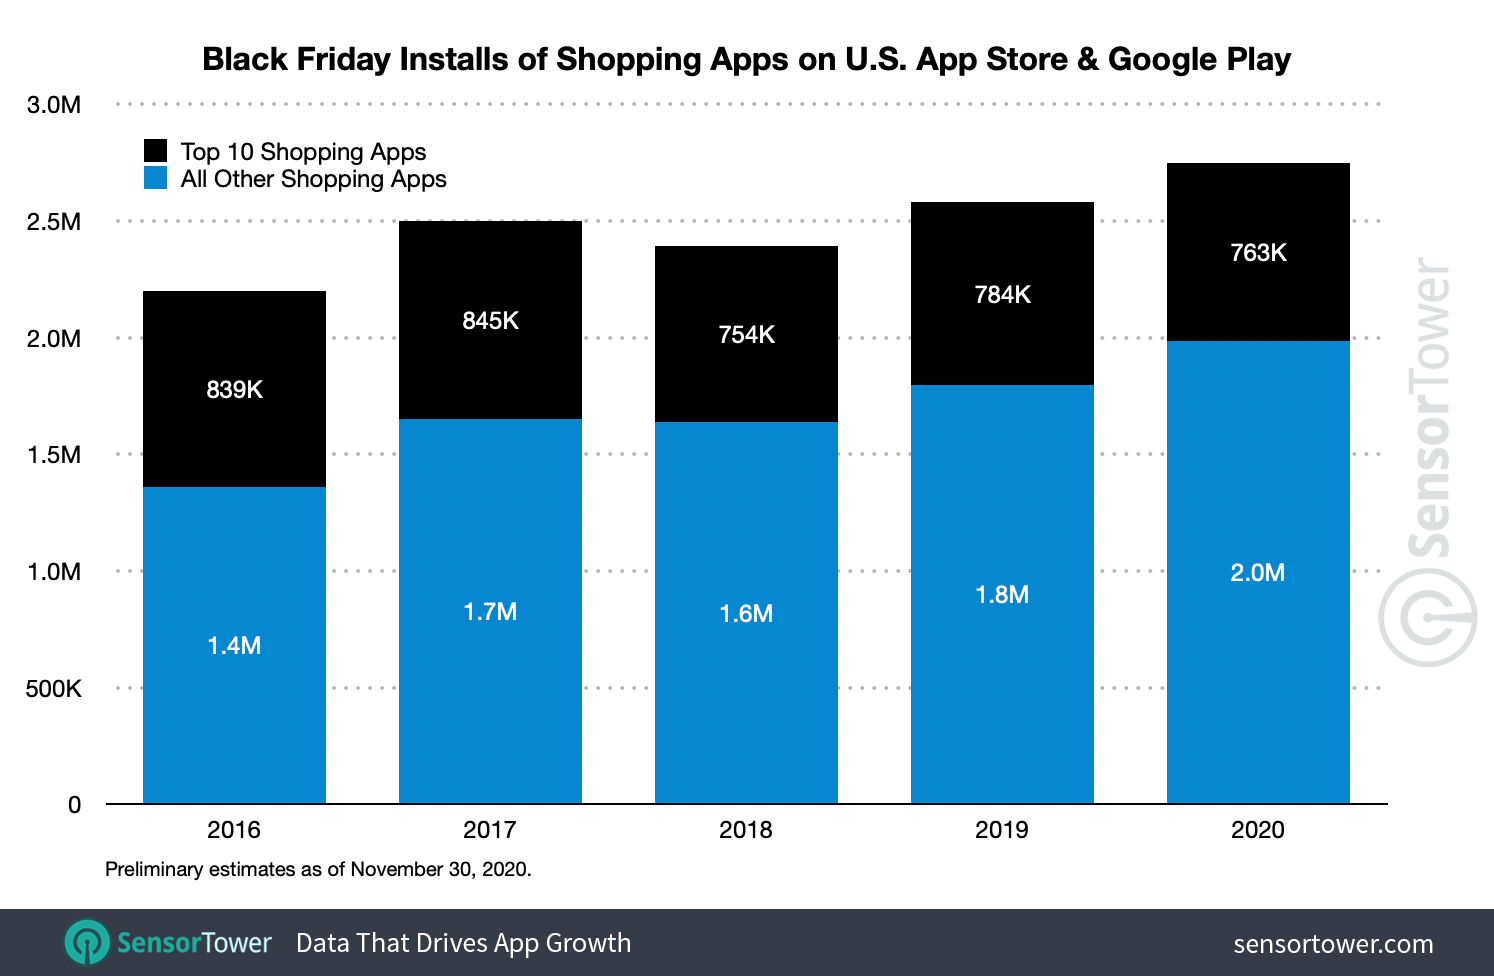 Black Friday app downloads grew 8 percent this year to a record 2.8 million installs.